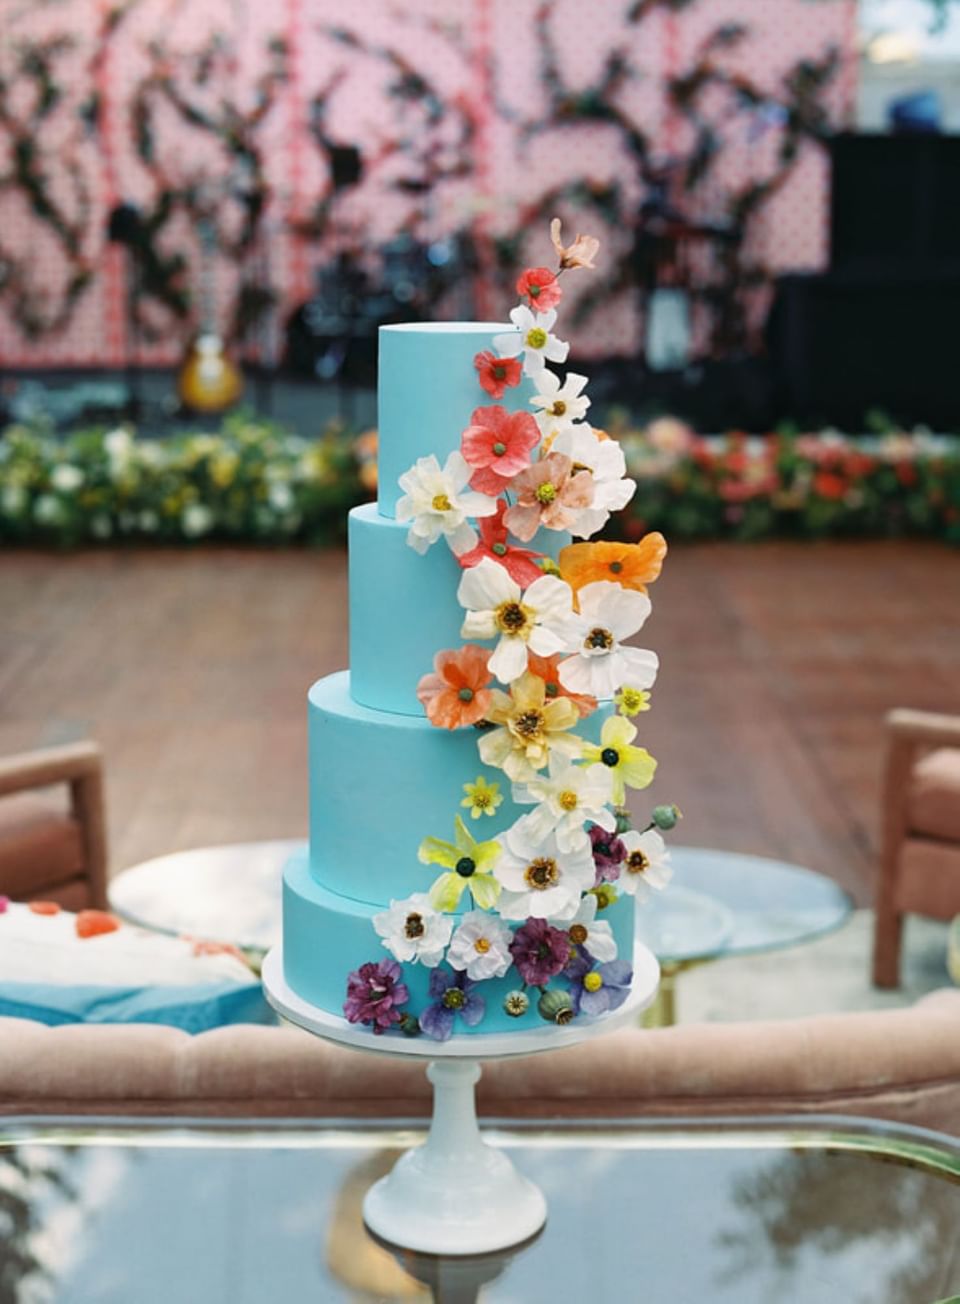 Close-up of a blue wedding cake decorated with colorful icing flowers at The Clifton